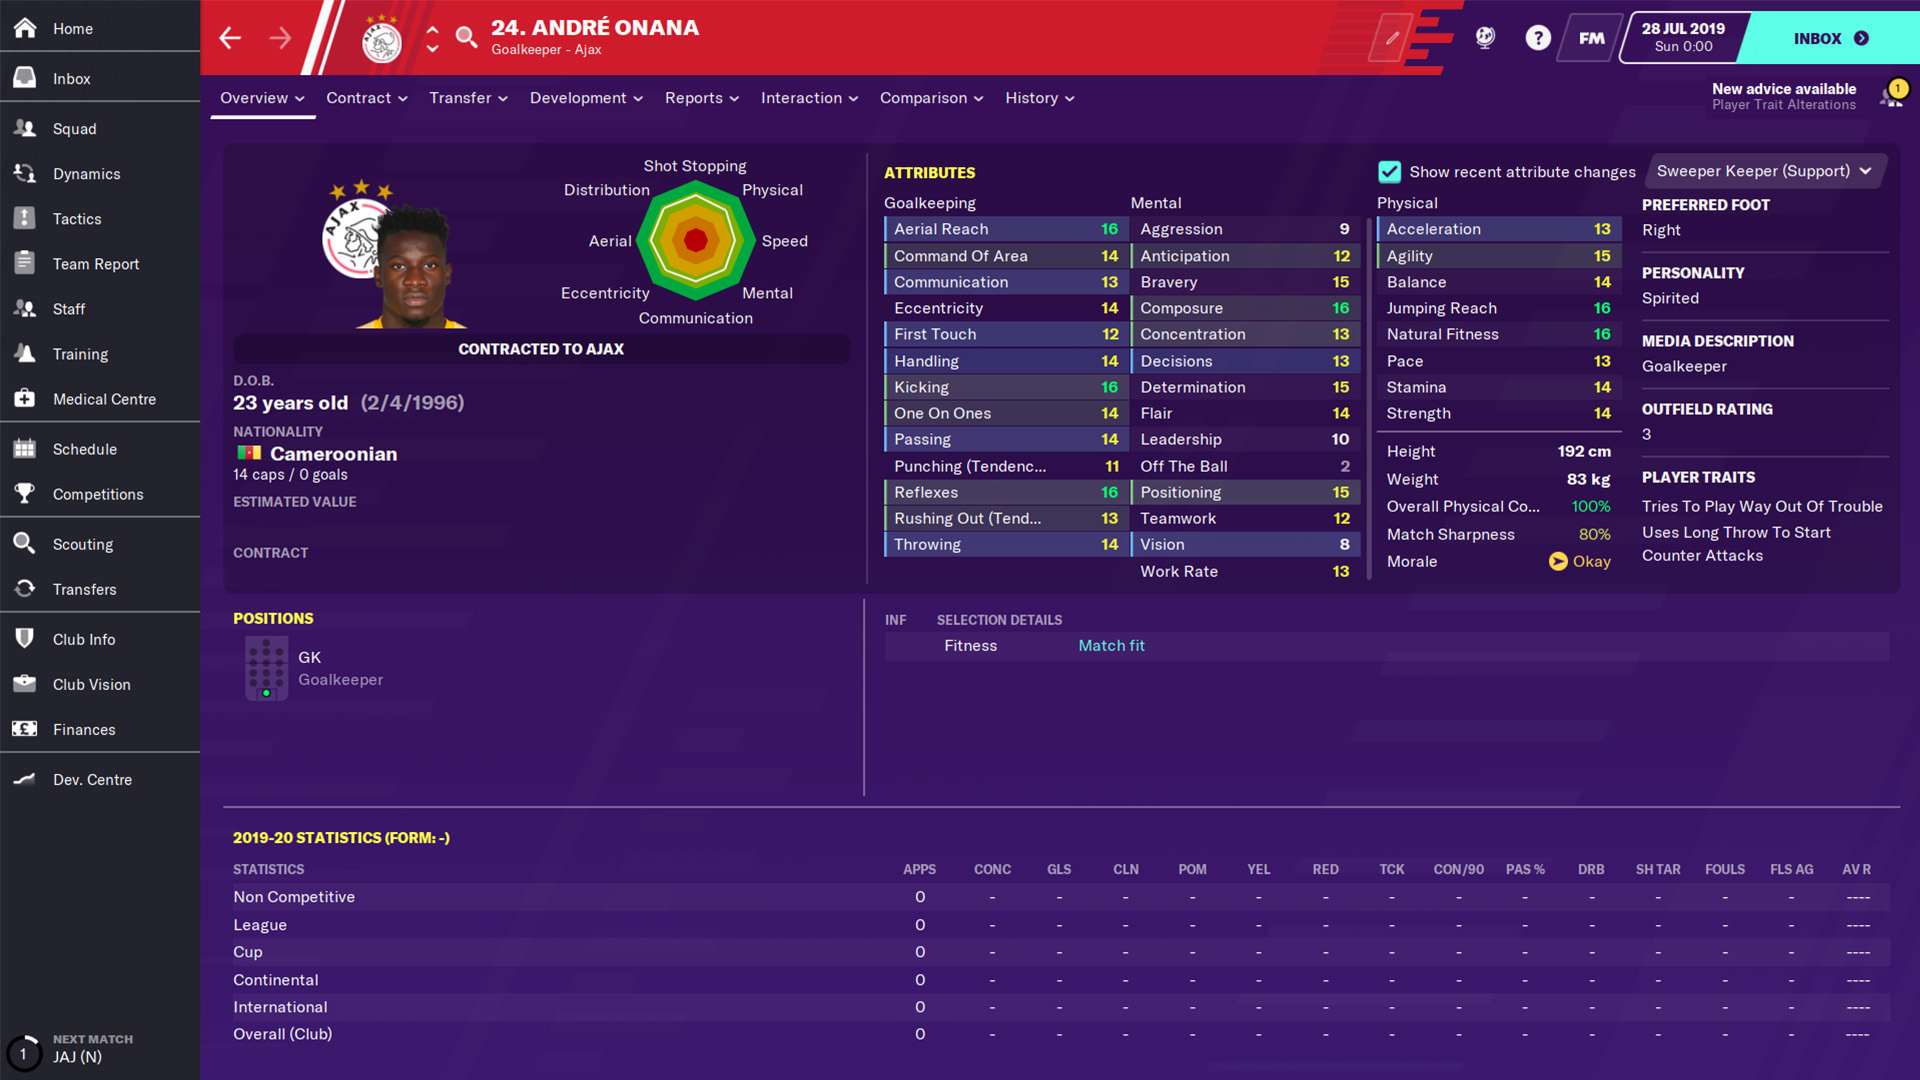 Andre Onana's profile in Football Manager 2020